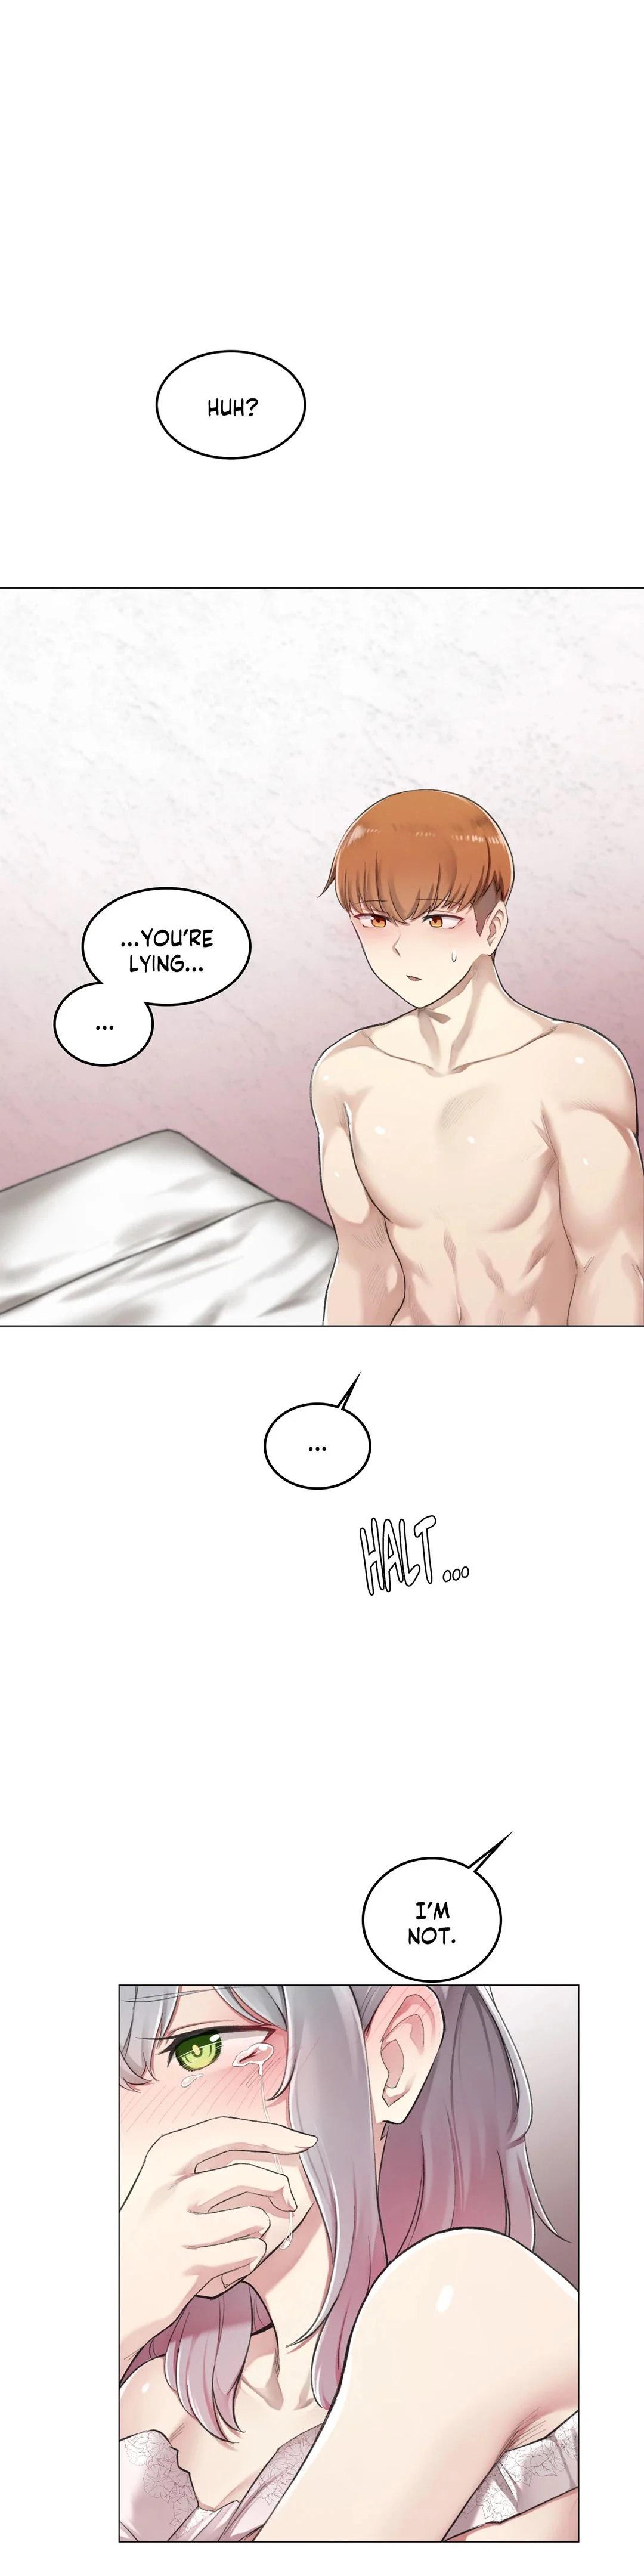 [Dumangoon, KONG_] Sexcape Room: Snap Off Ch.7/7 [English] [Manhwa PDF] Completed 141